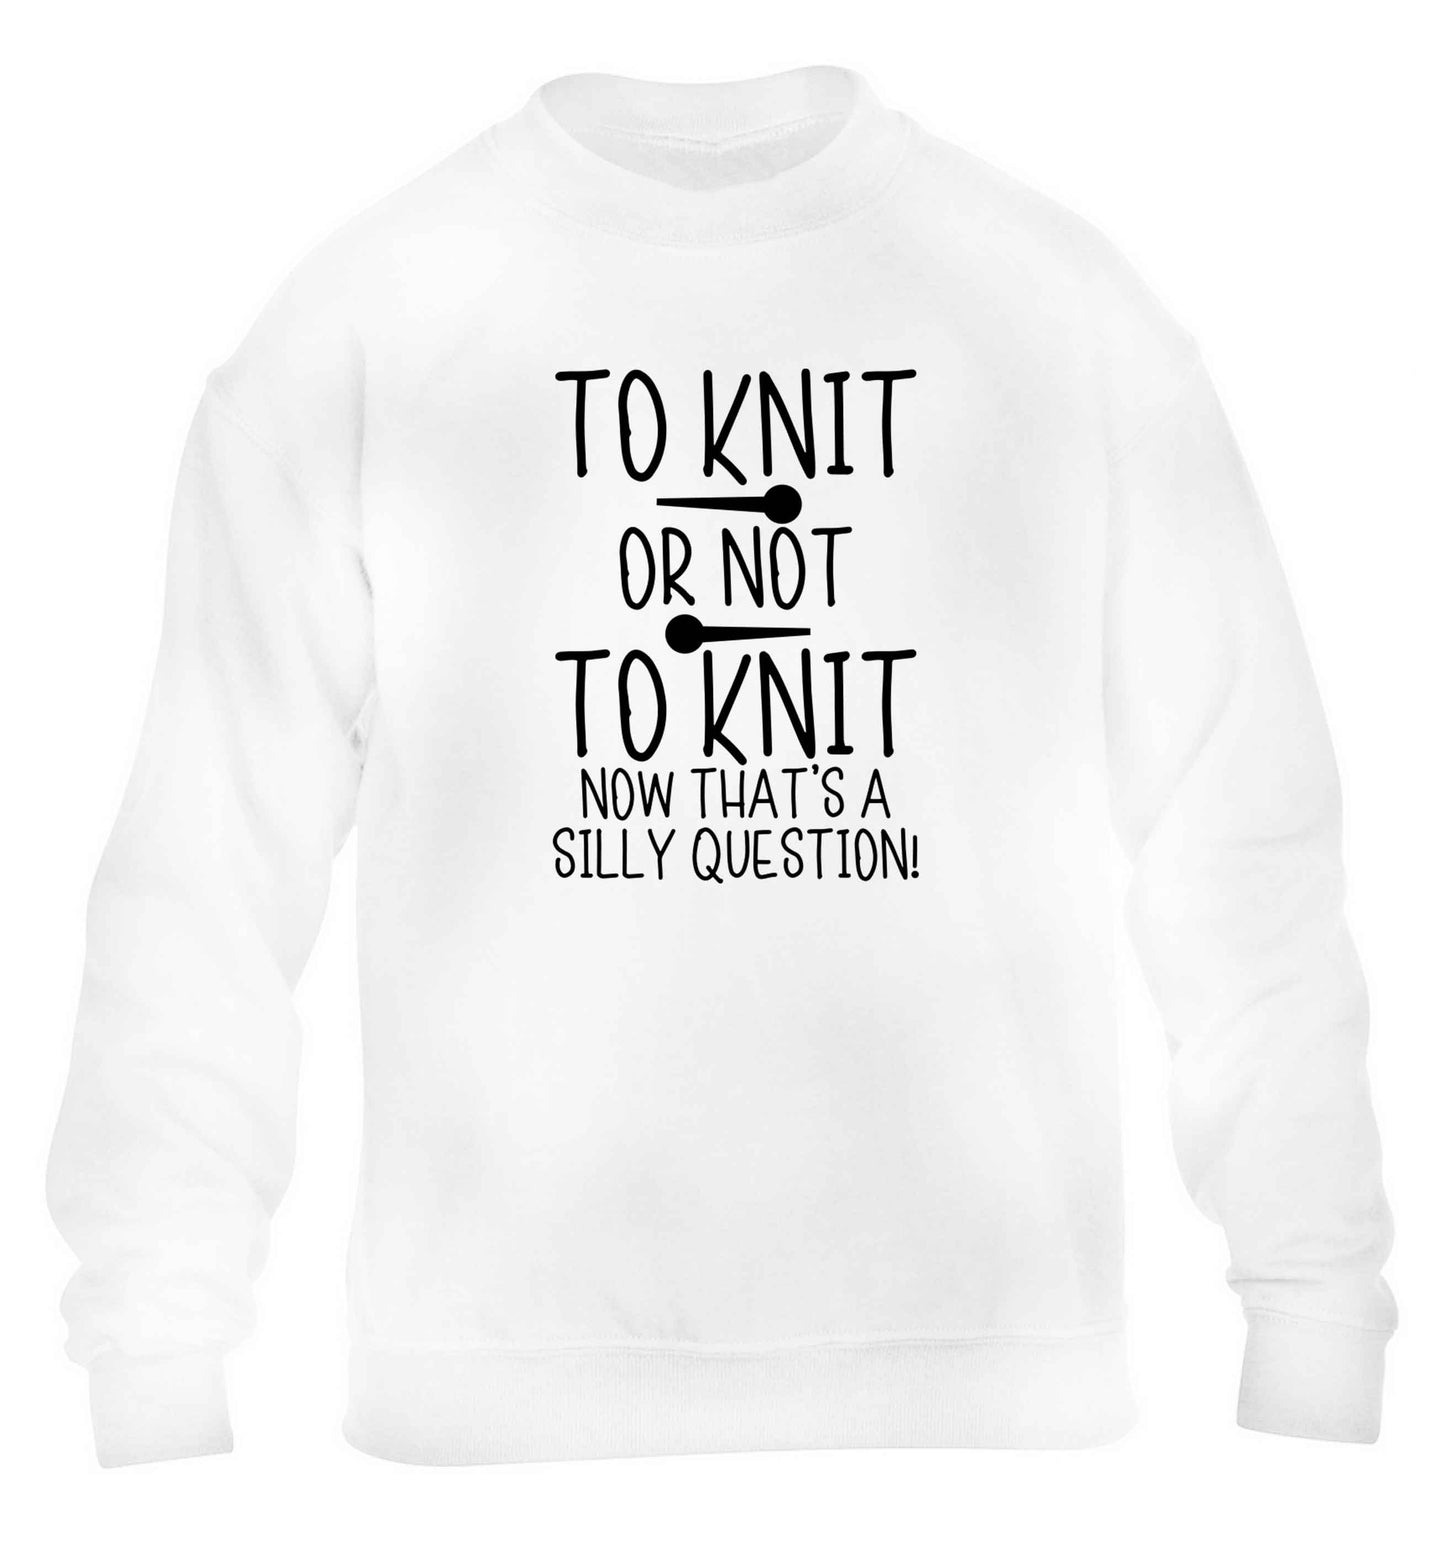 To knit or not to knit now that's a silly question children's white sweater 12-13 Years